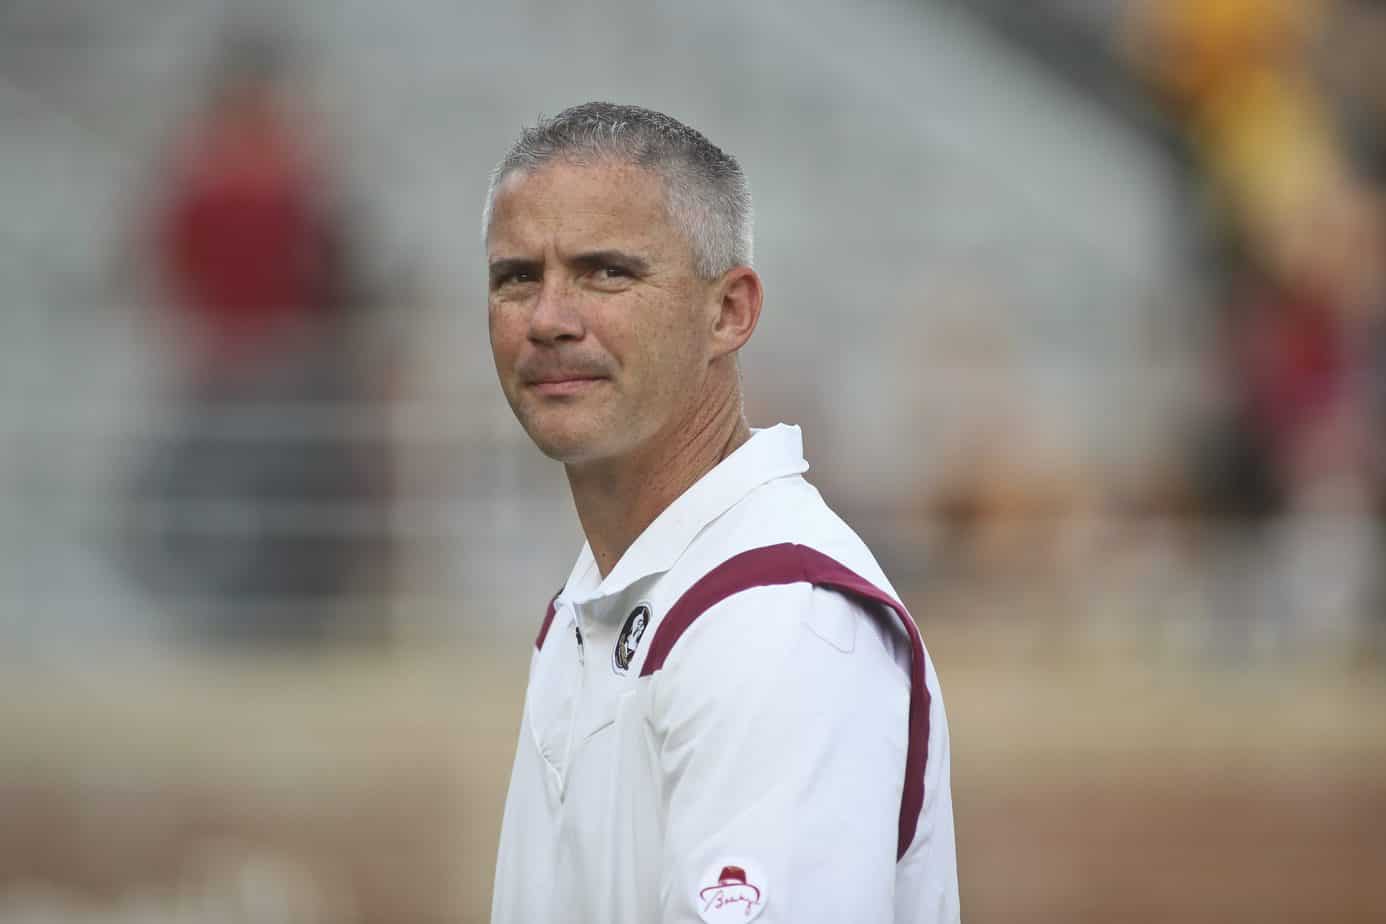 Florida State head coach Mike Norvell was blasted all over social media after seemingly reacting to Travis Hunter flipping to Deion Sanders' Jackson State